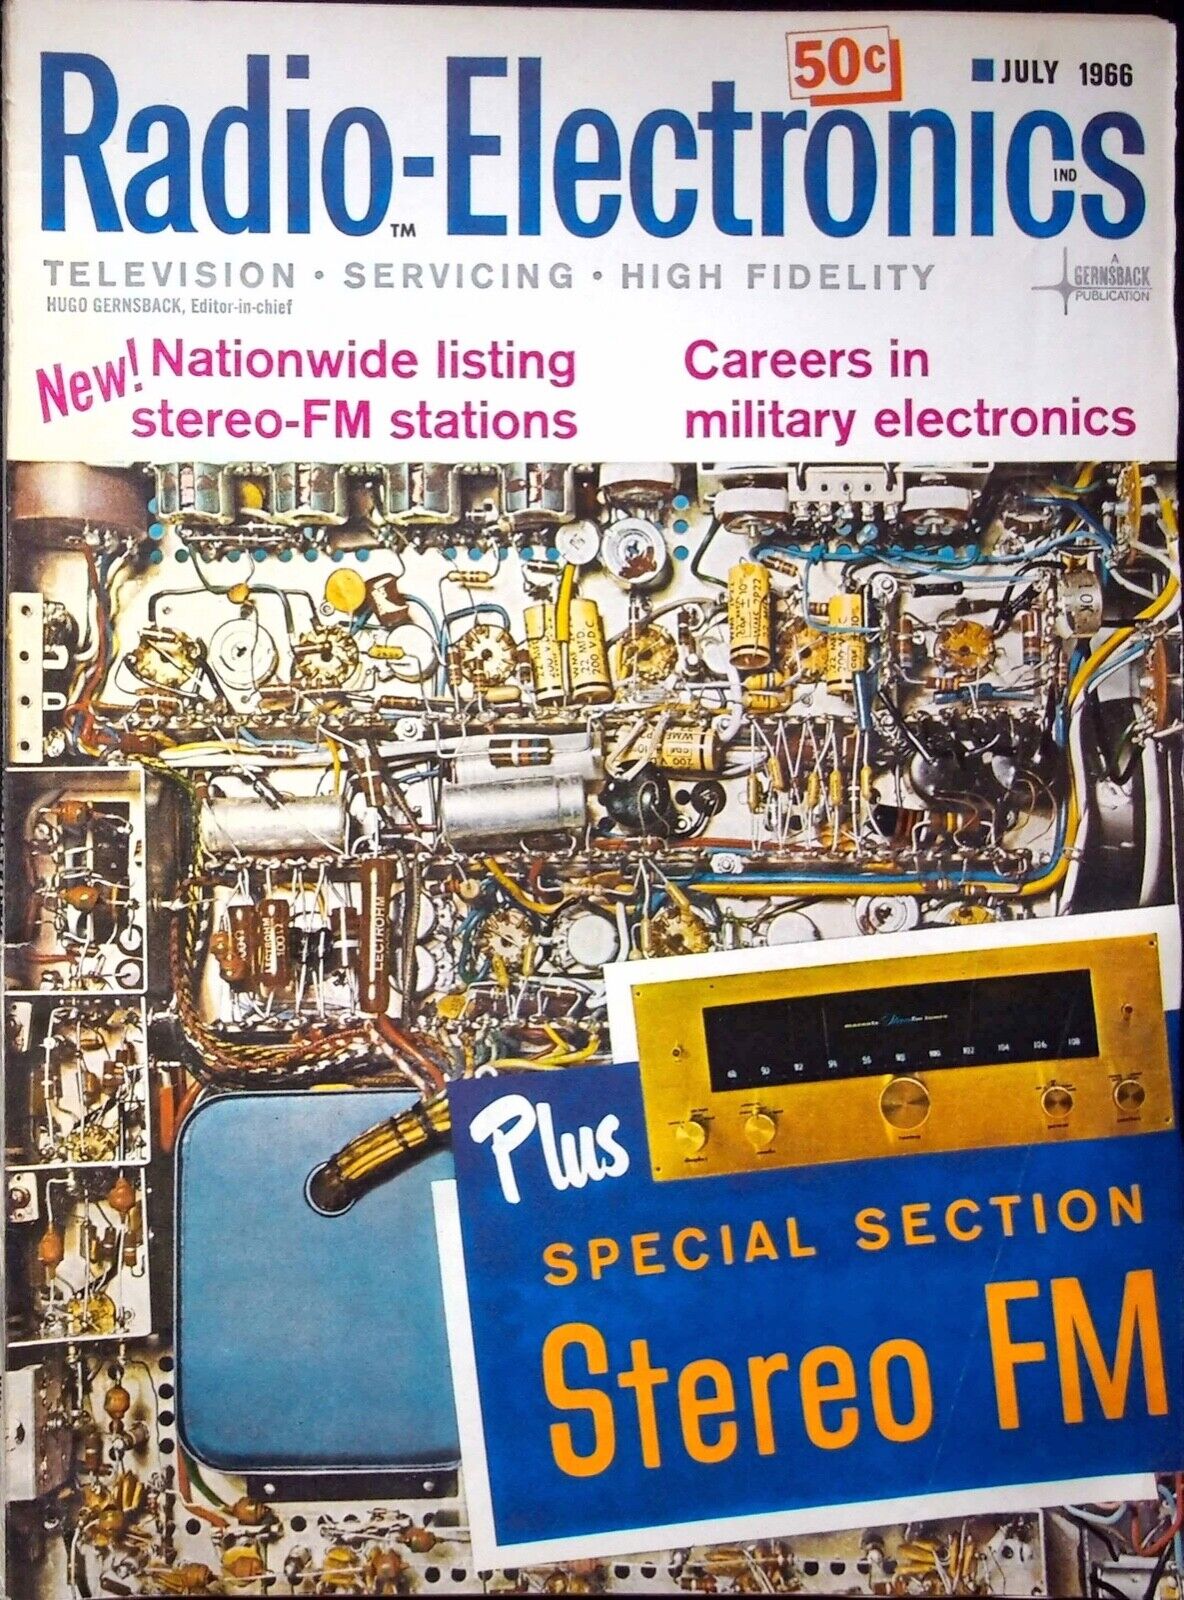 SPECIAL SECTION STEREO FM - RADIO - ELECTRONICS MAGAZINE, JULY 1966